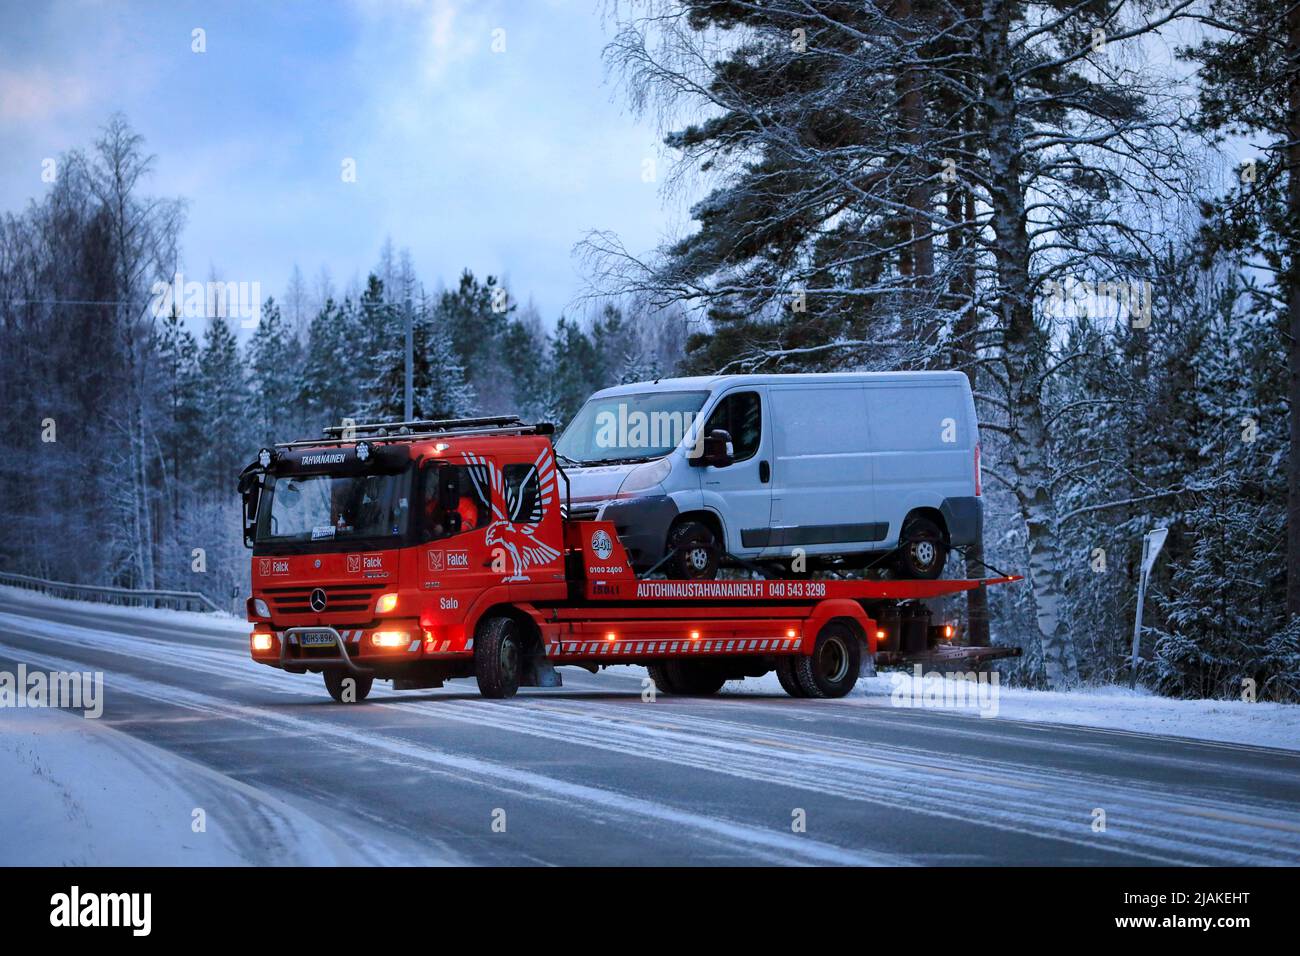 Mercedes-Benz Atego tow truck carrying a white van enters highway on a winter evening. Salo, Finland. December 28, 2021. Stock Photo